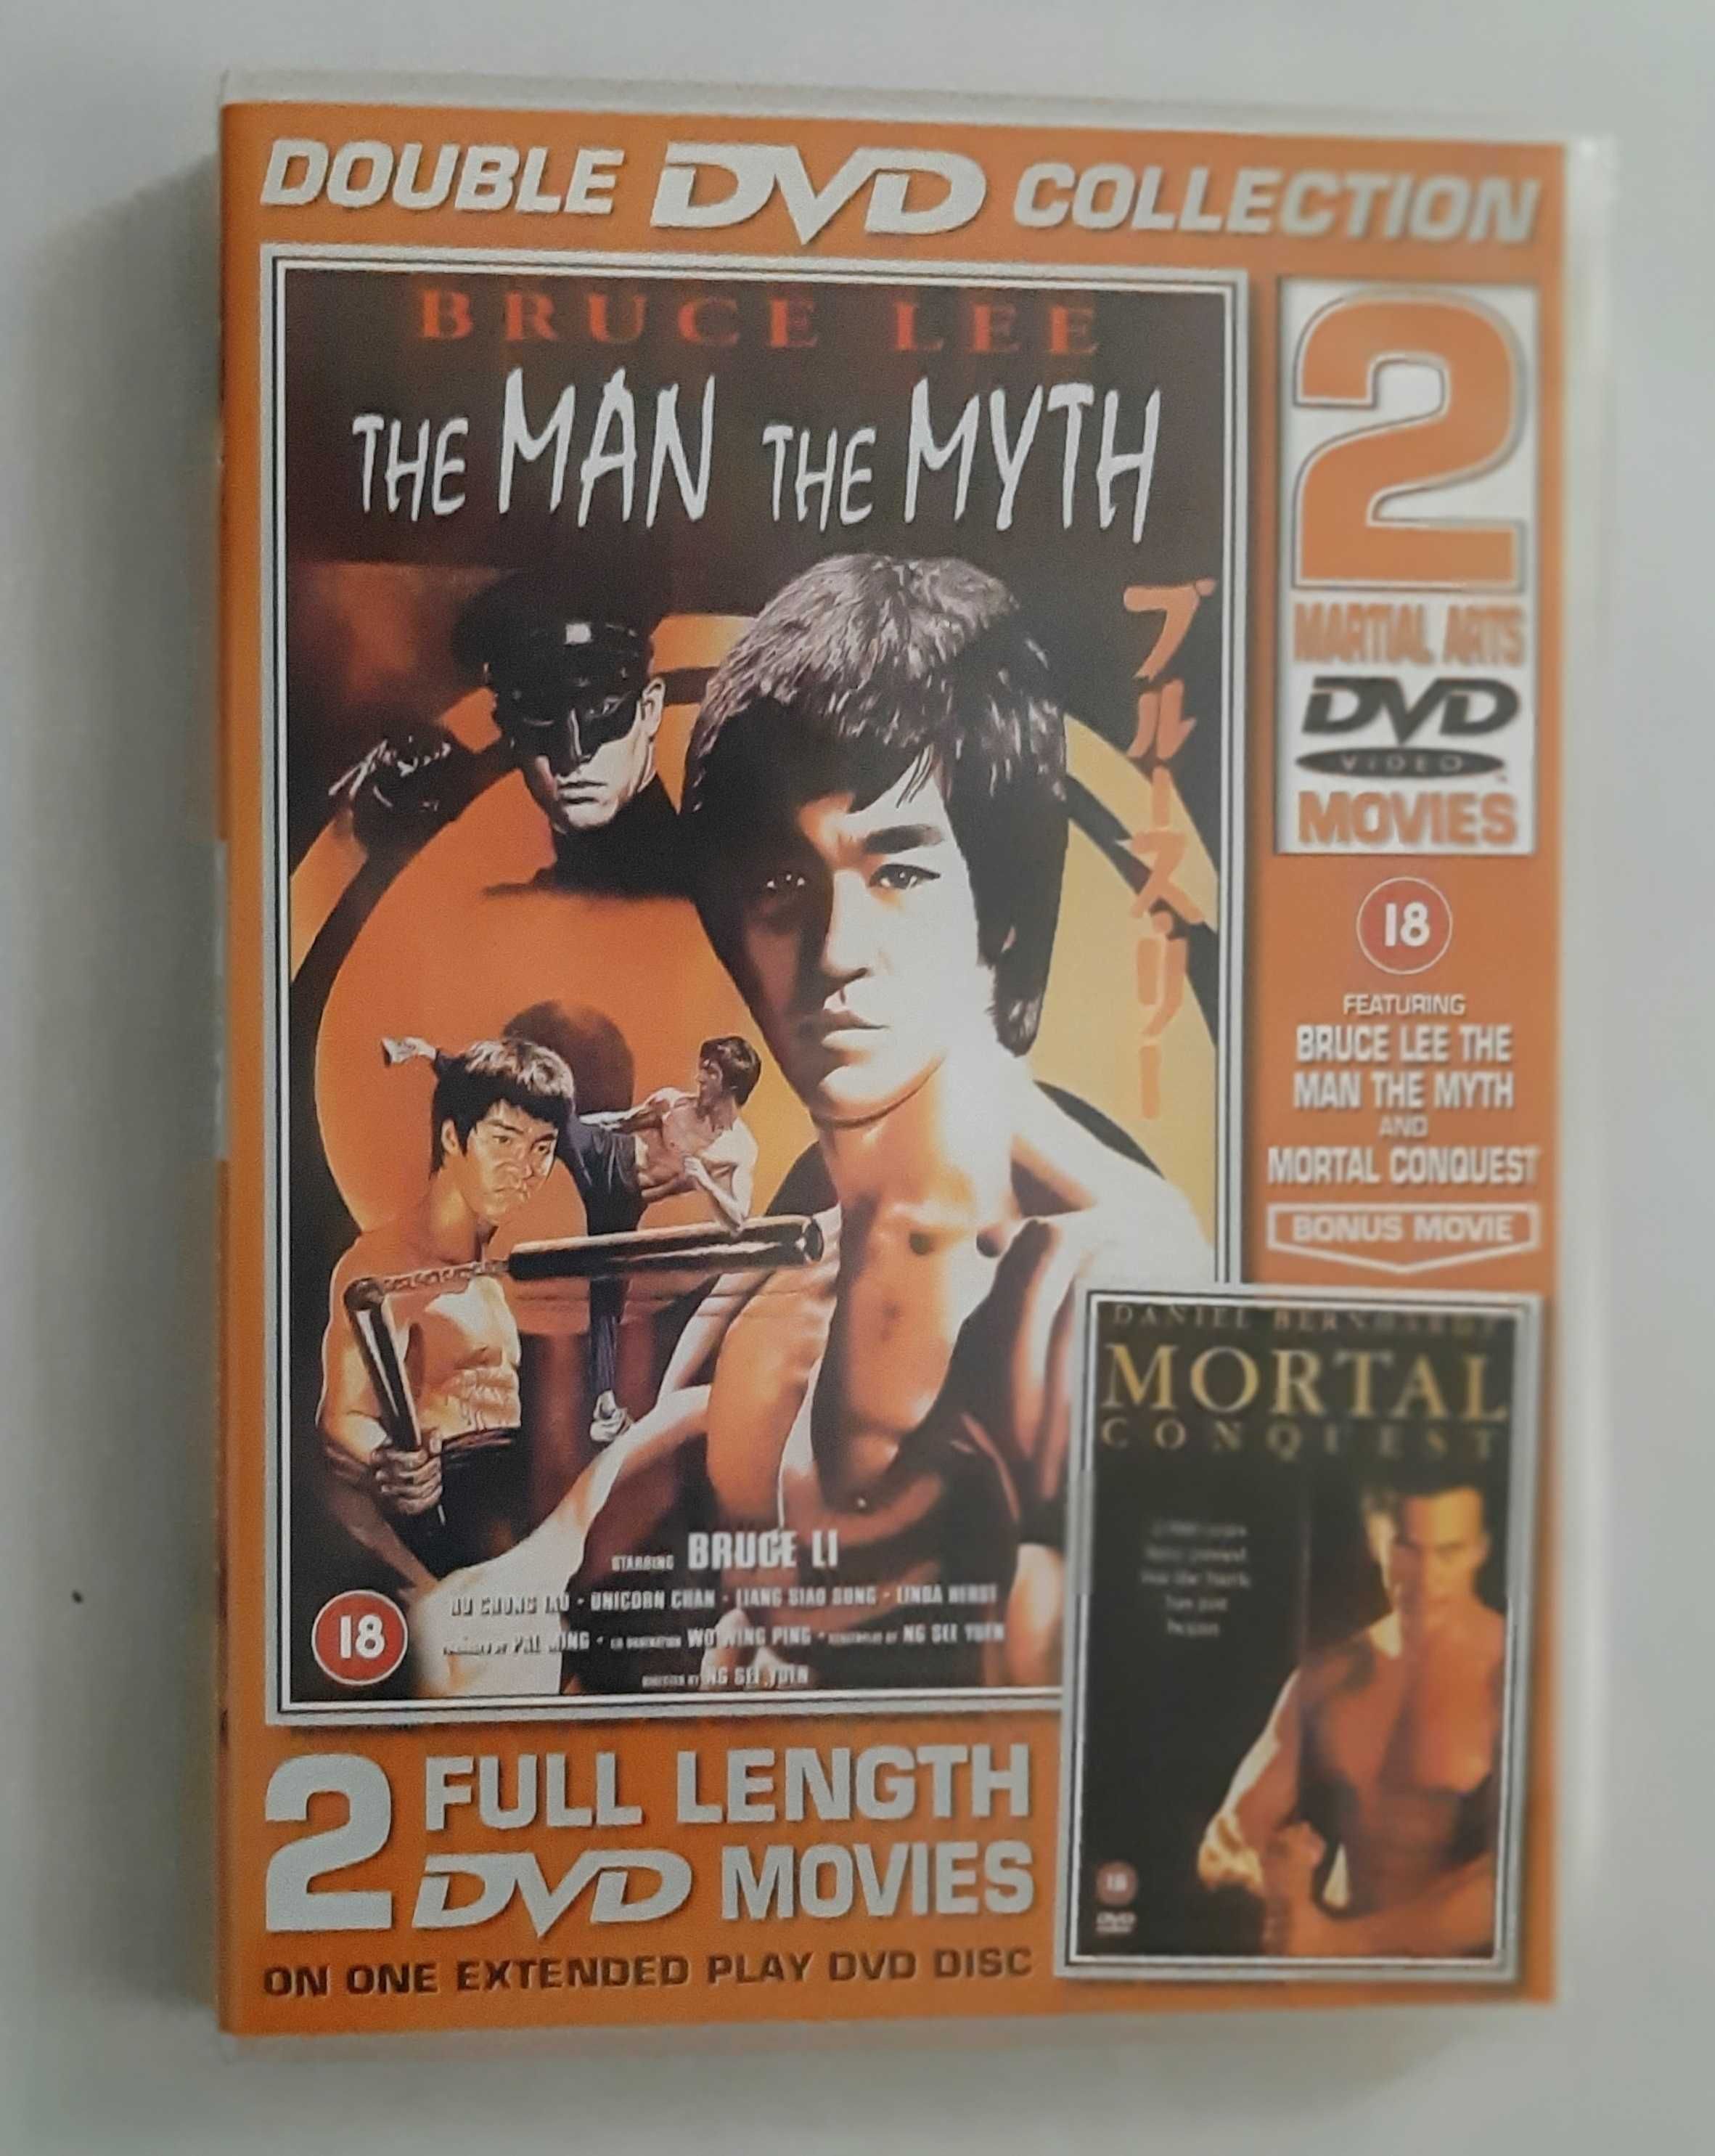 Bruce Lee - The Man The Myth / Mortal Conquest DVD